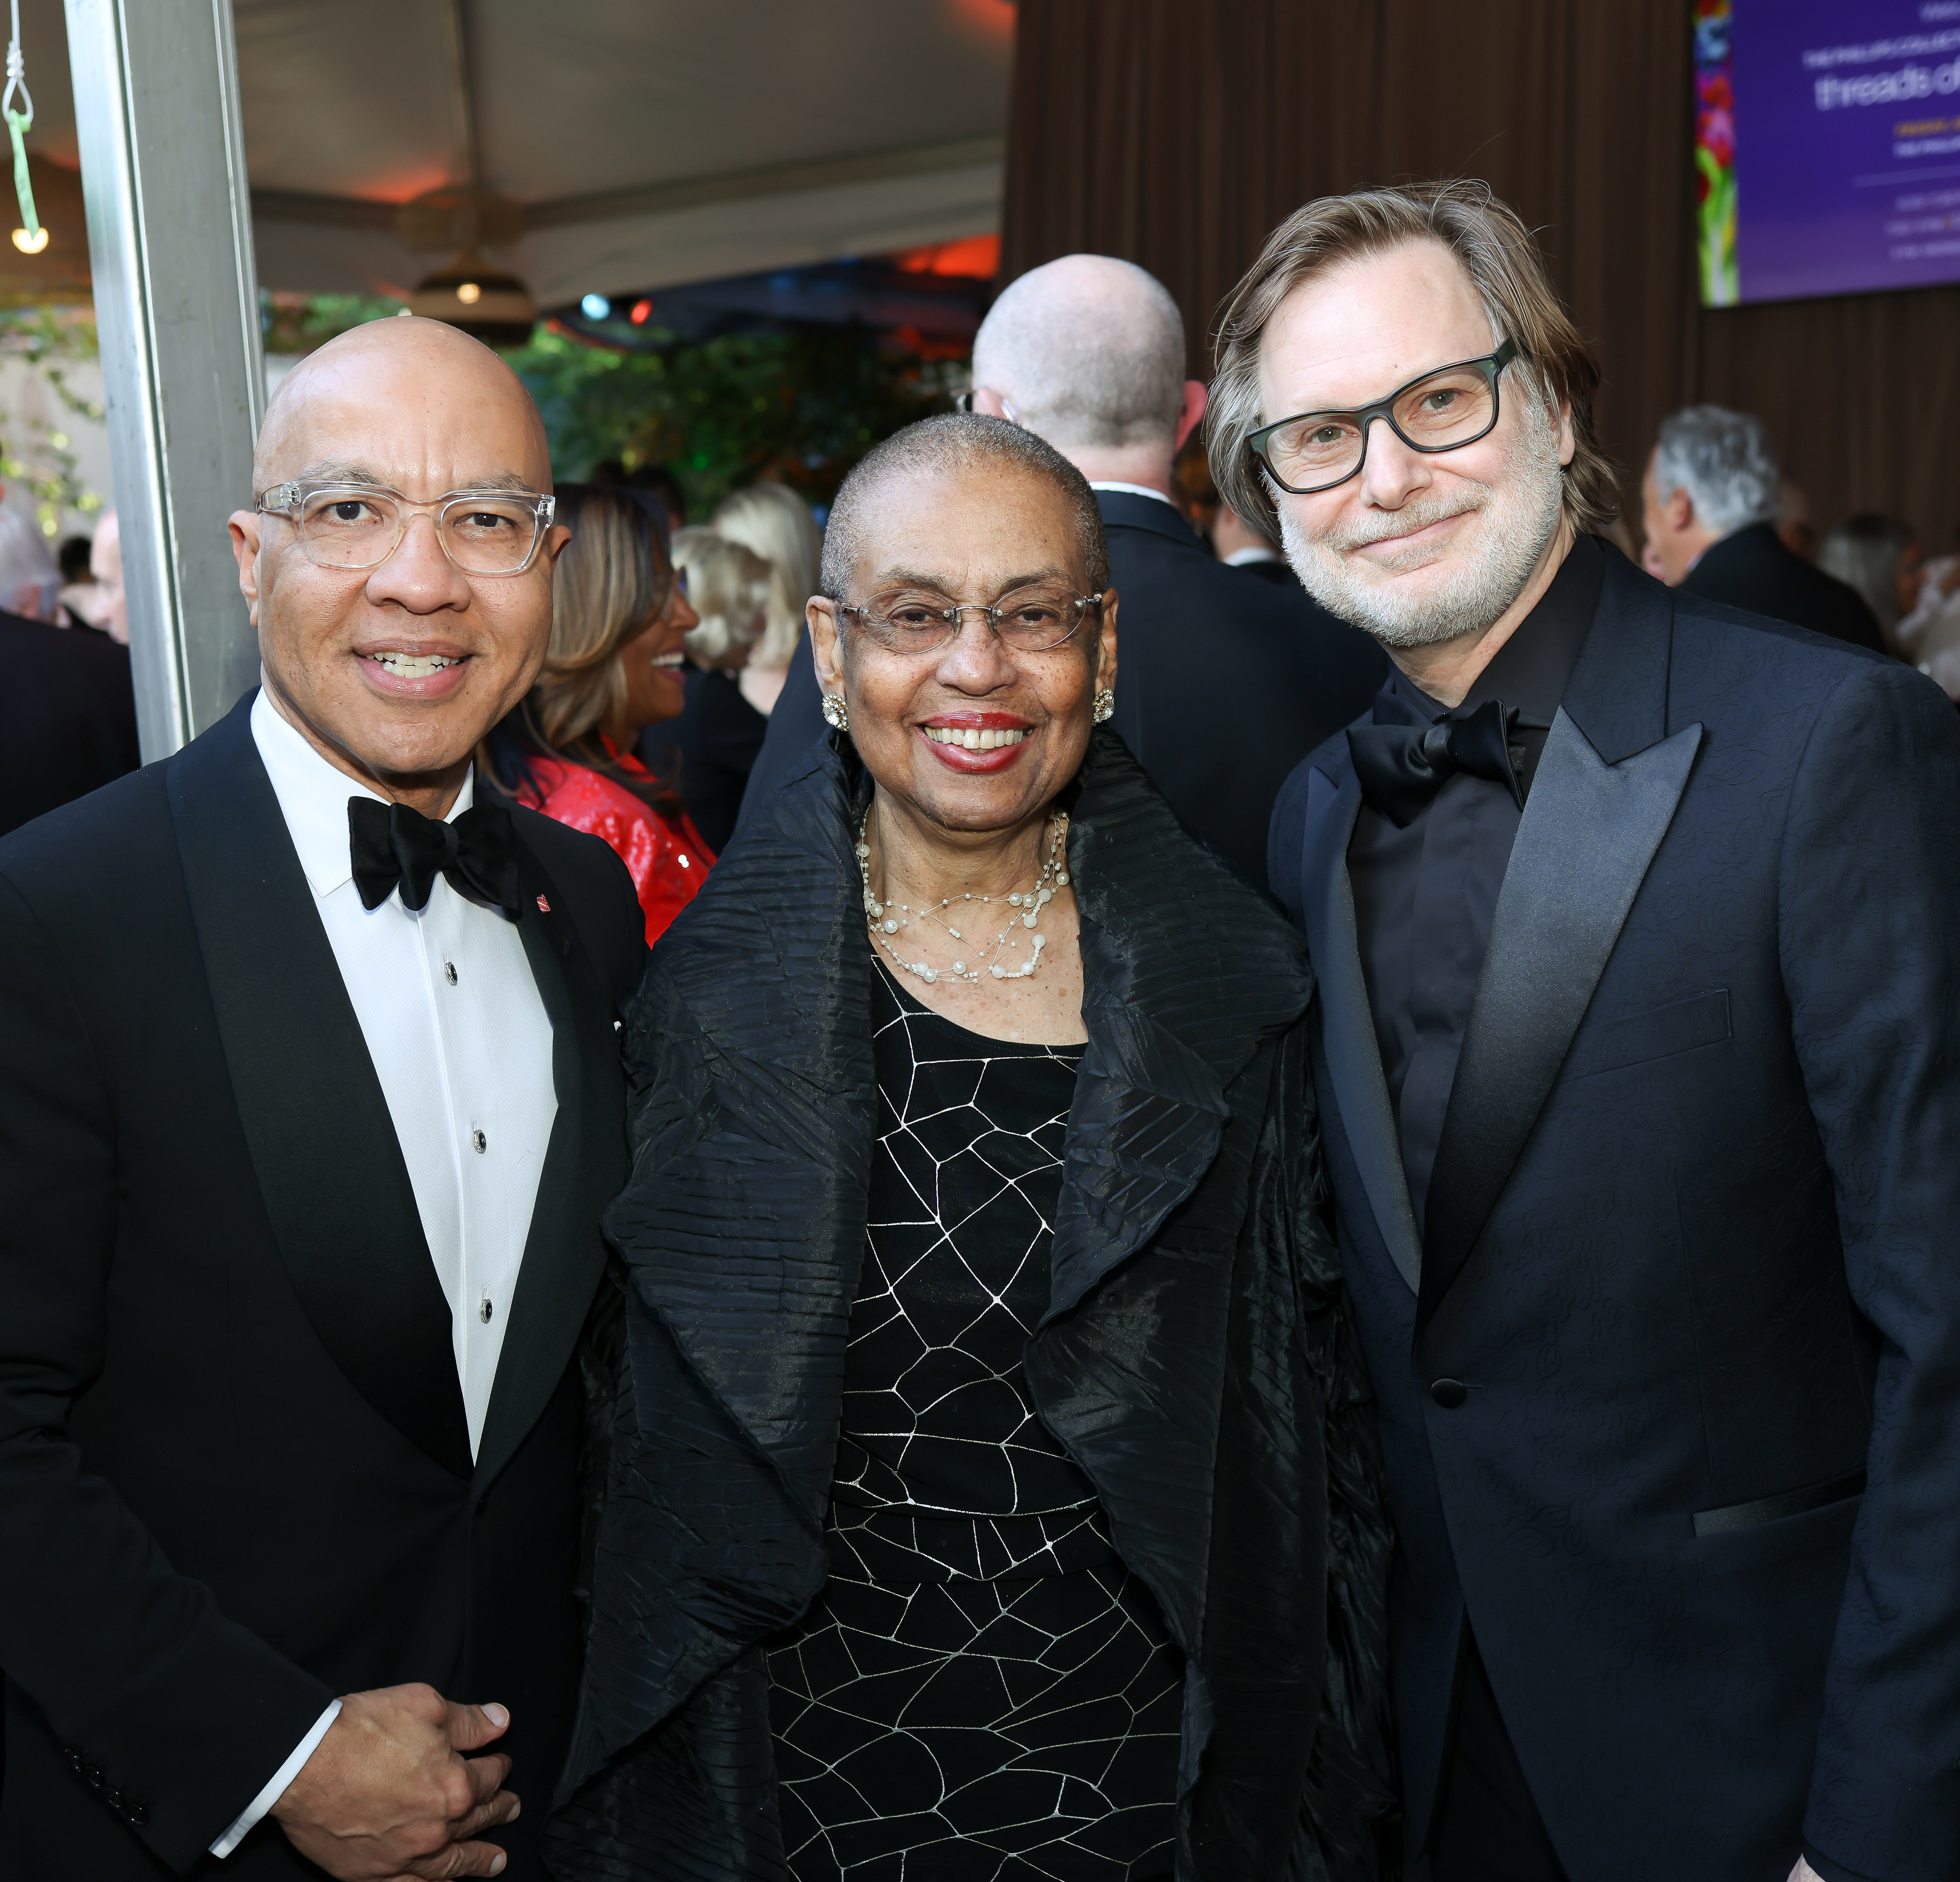 Photograph of three people in black-tie standing together smiling at camera